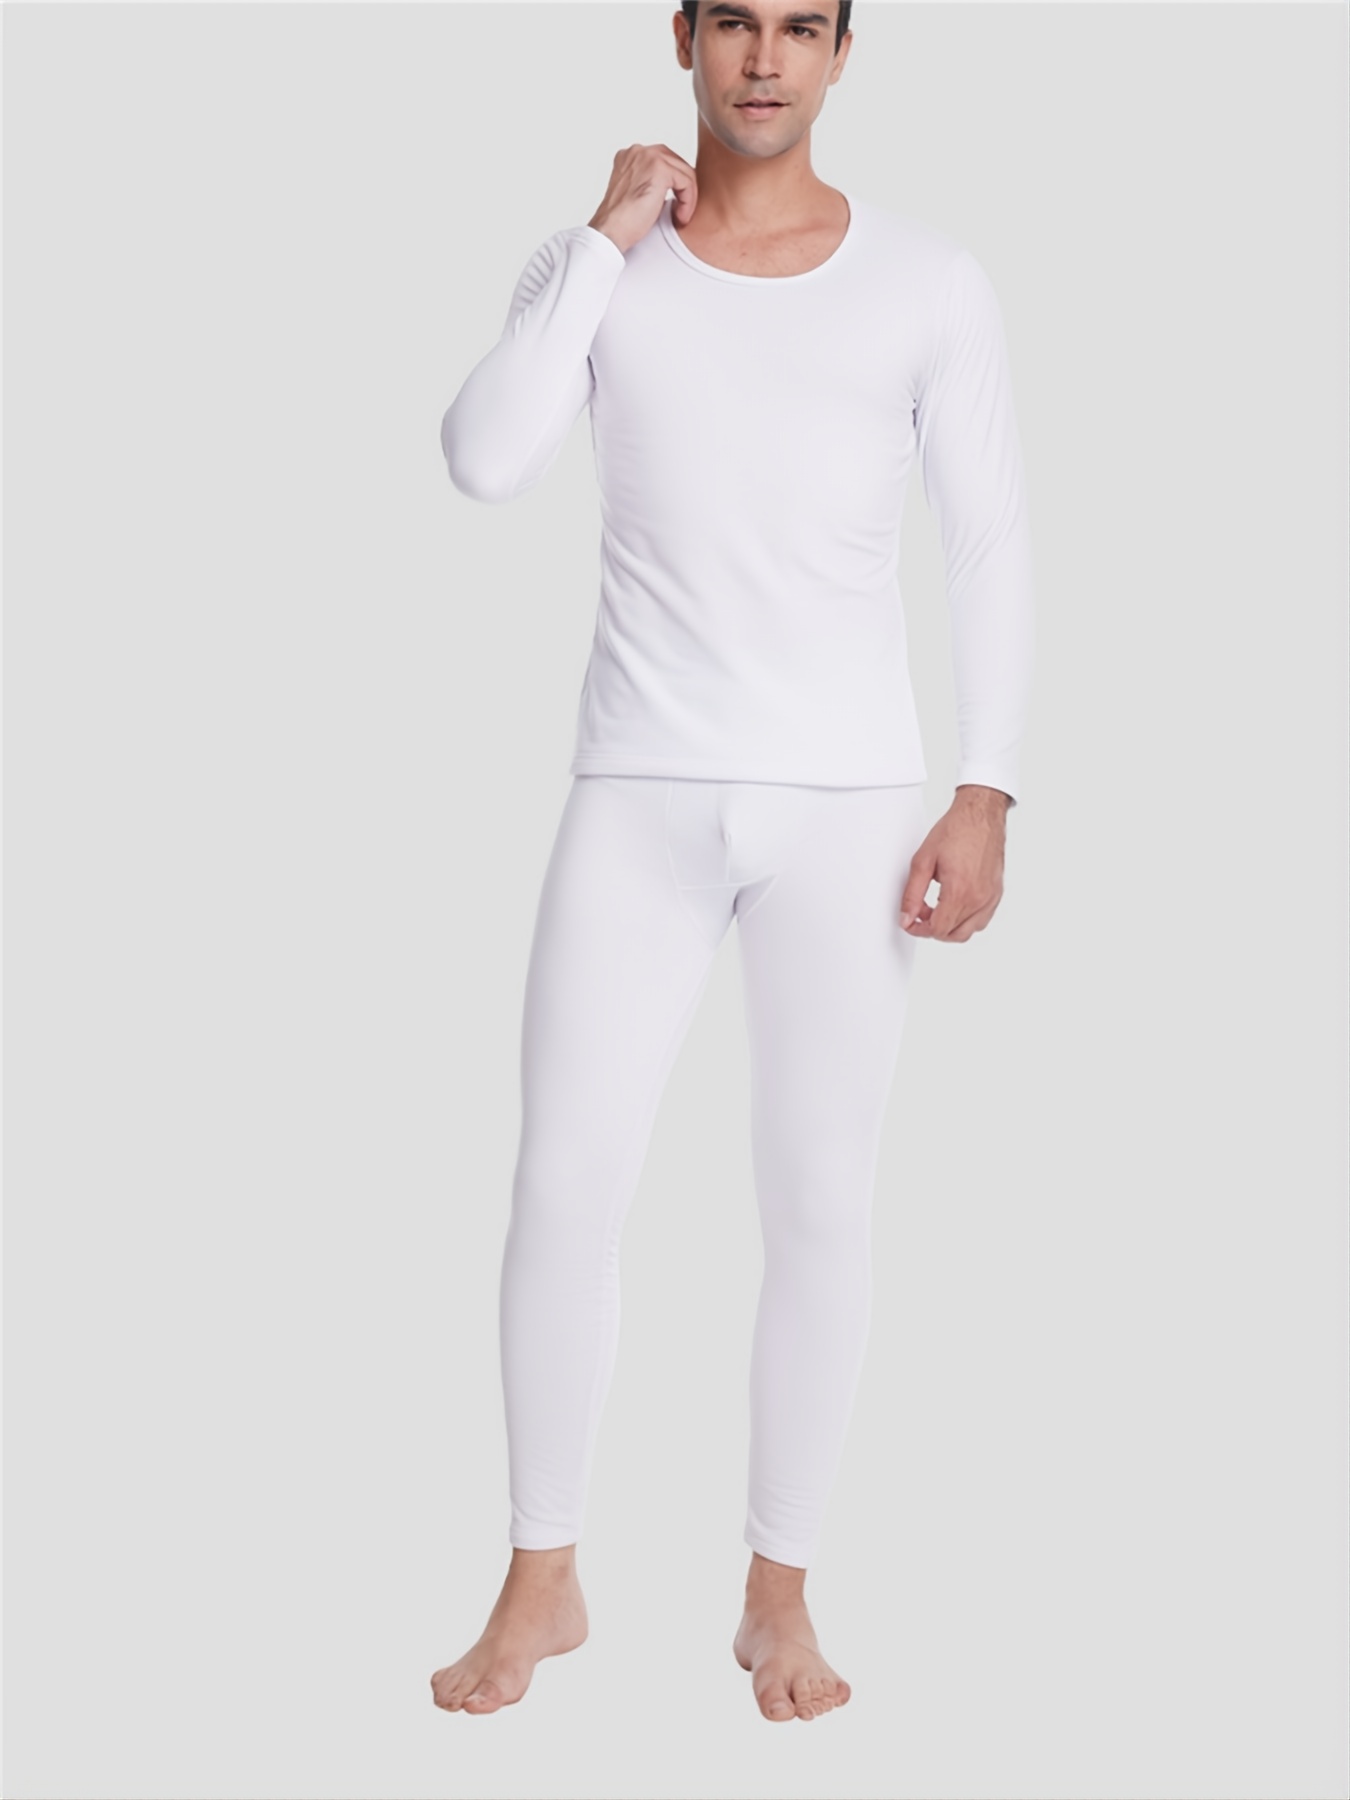 Thermal Underwear for Men, Long Johns Fleece Lined Thermals Top Bottom Set  Base Layer for Cold Weather